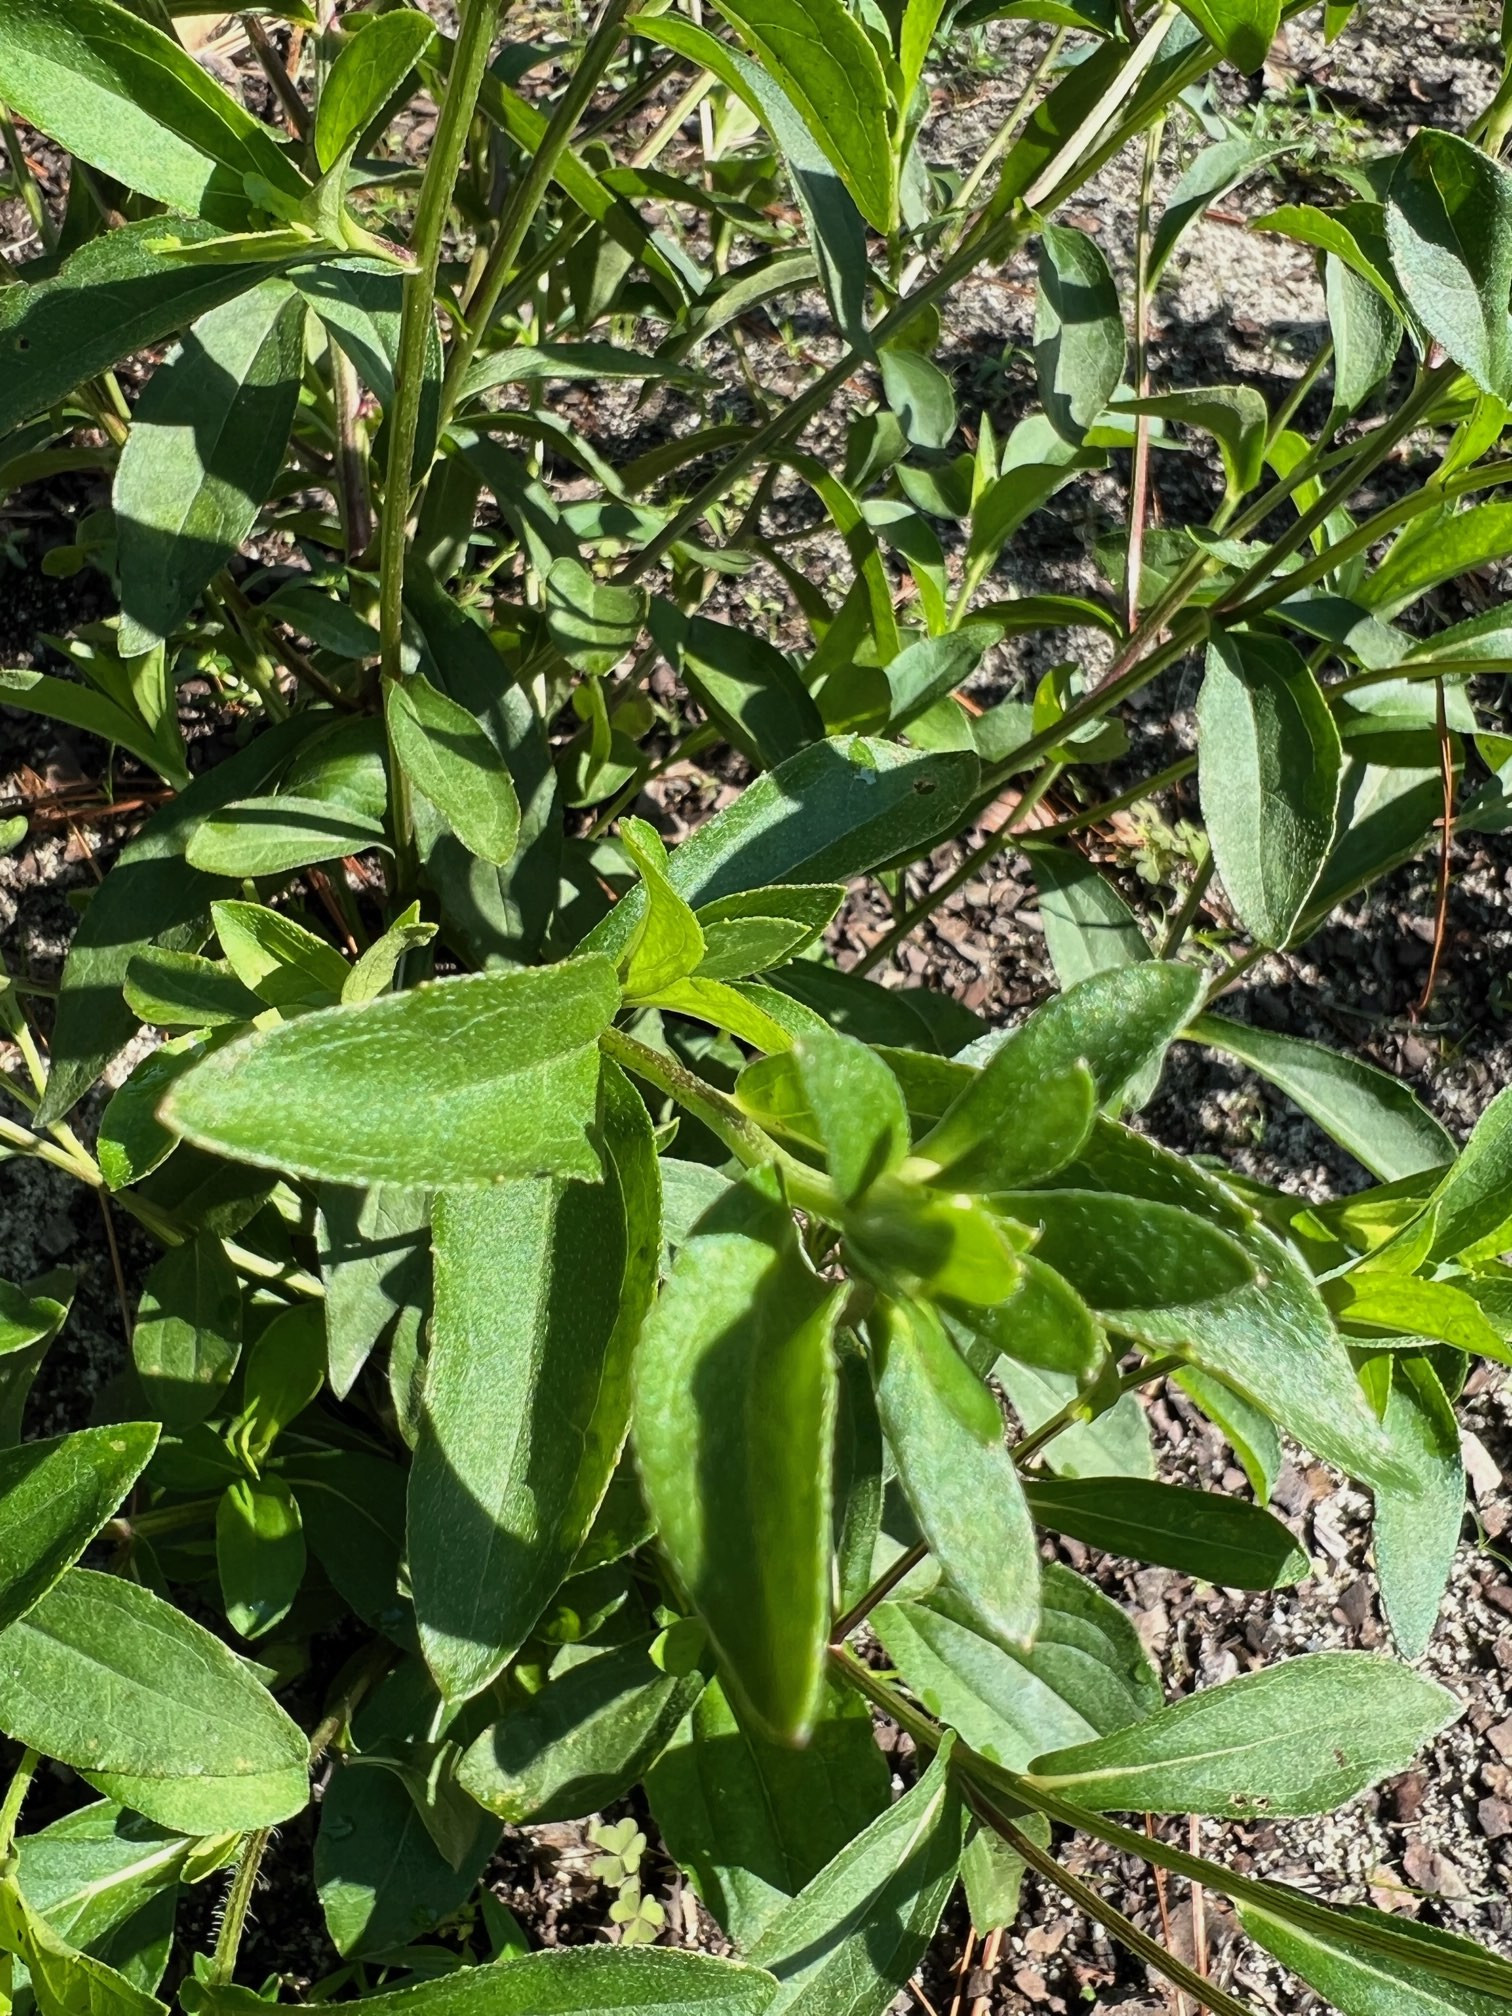 The Scientific Name is Rudbeckia fulgida. You will likely hear them called Eastern Coneflower. This picture shows the Elliptic to ovate alternate stem leaves. of Rudbeckia fulgida